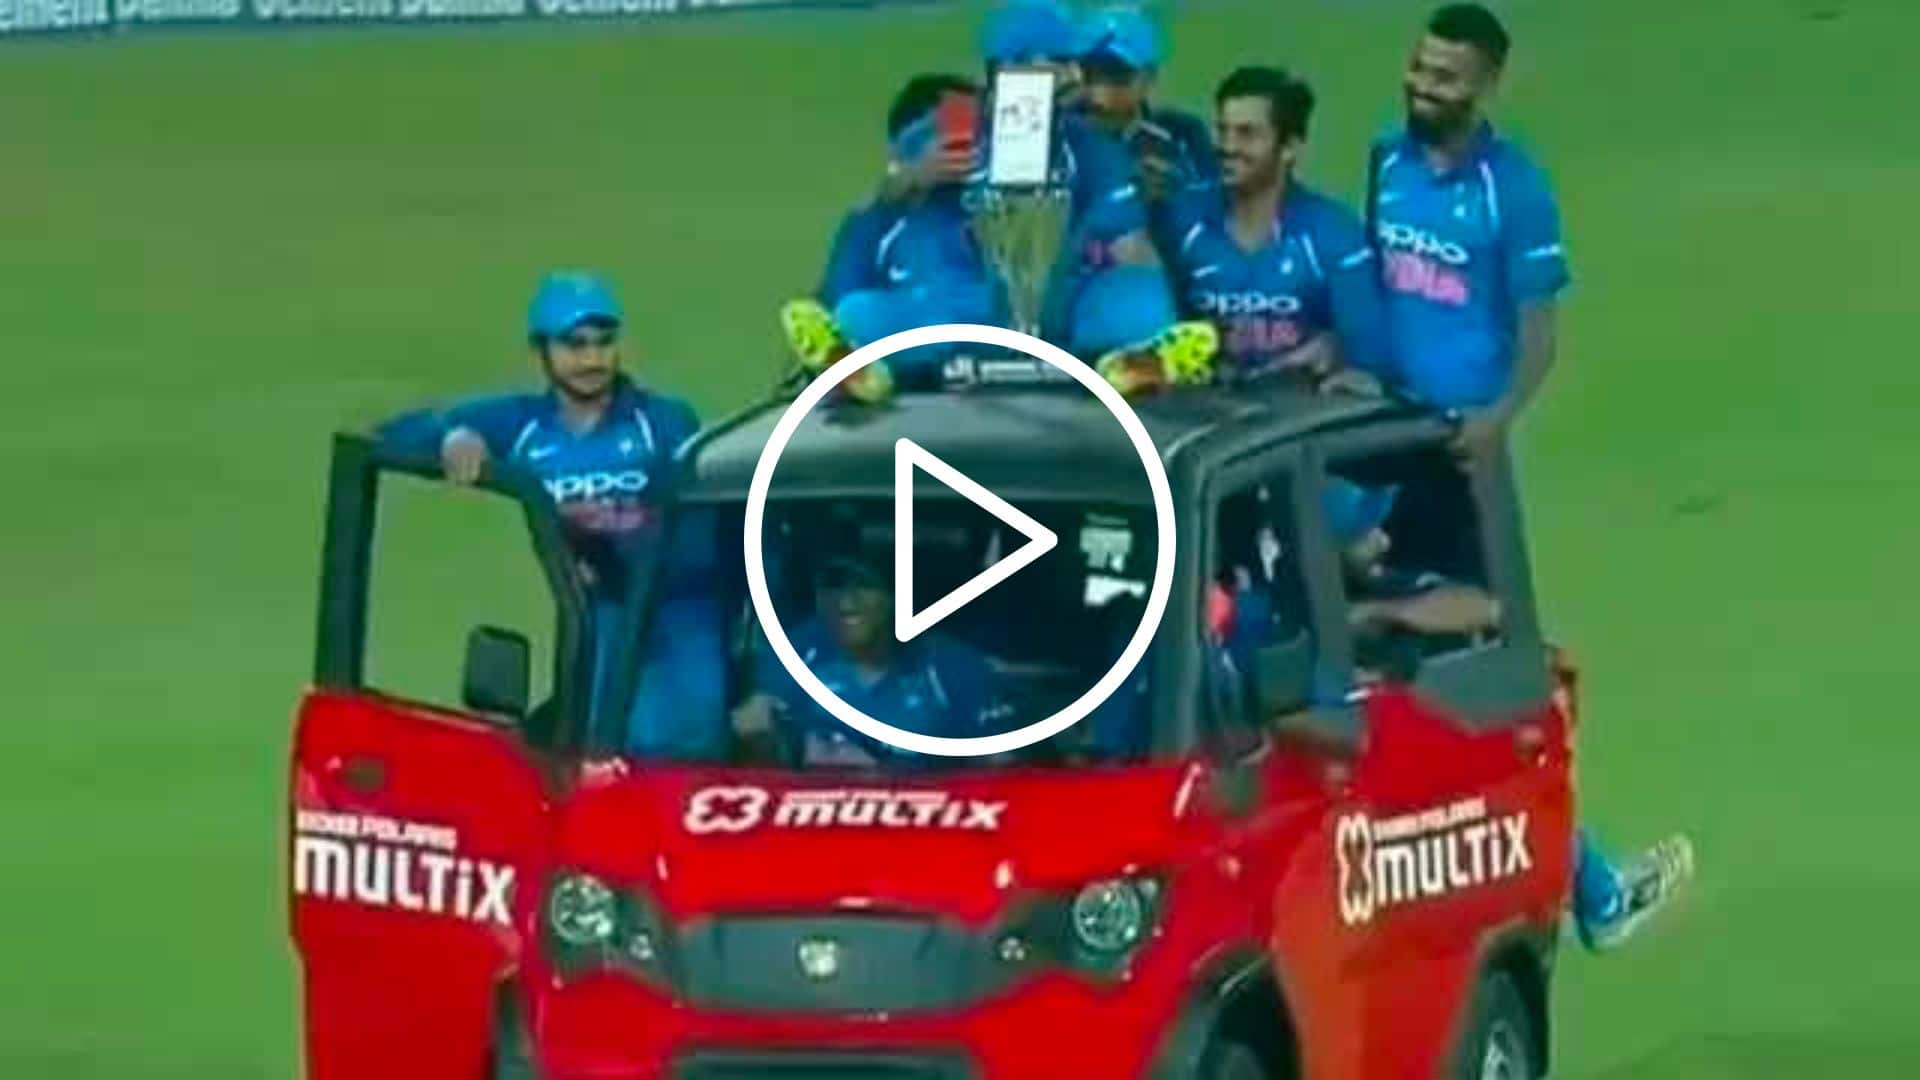 [Watch] When MS Dhoni Took Team India For A Ride On The Field In Sri Lanka